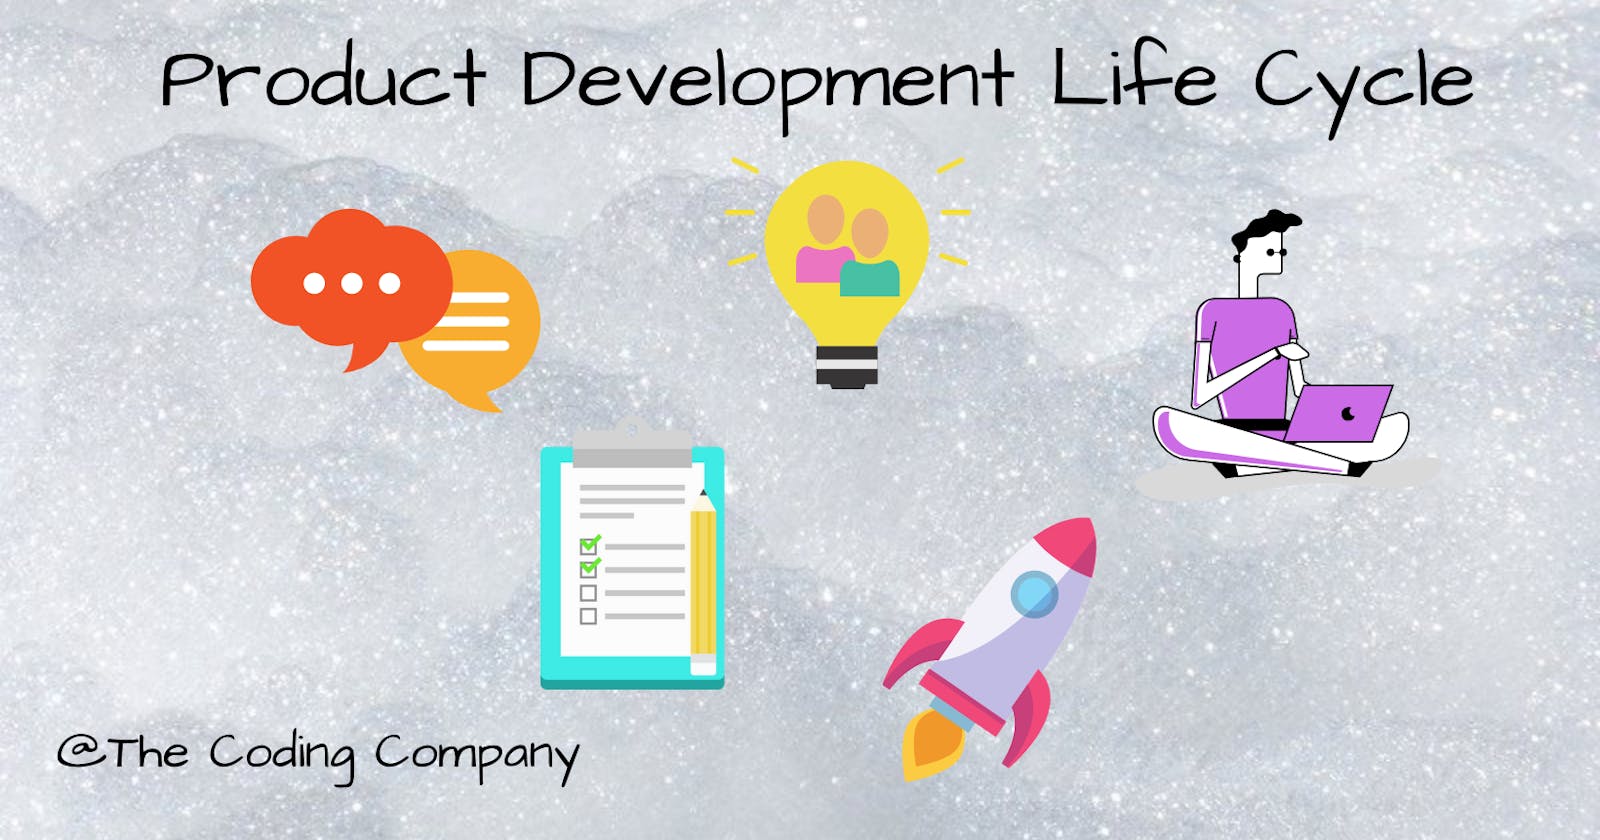 What is the Product Development Life Cycle?